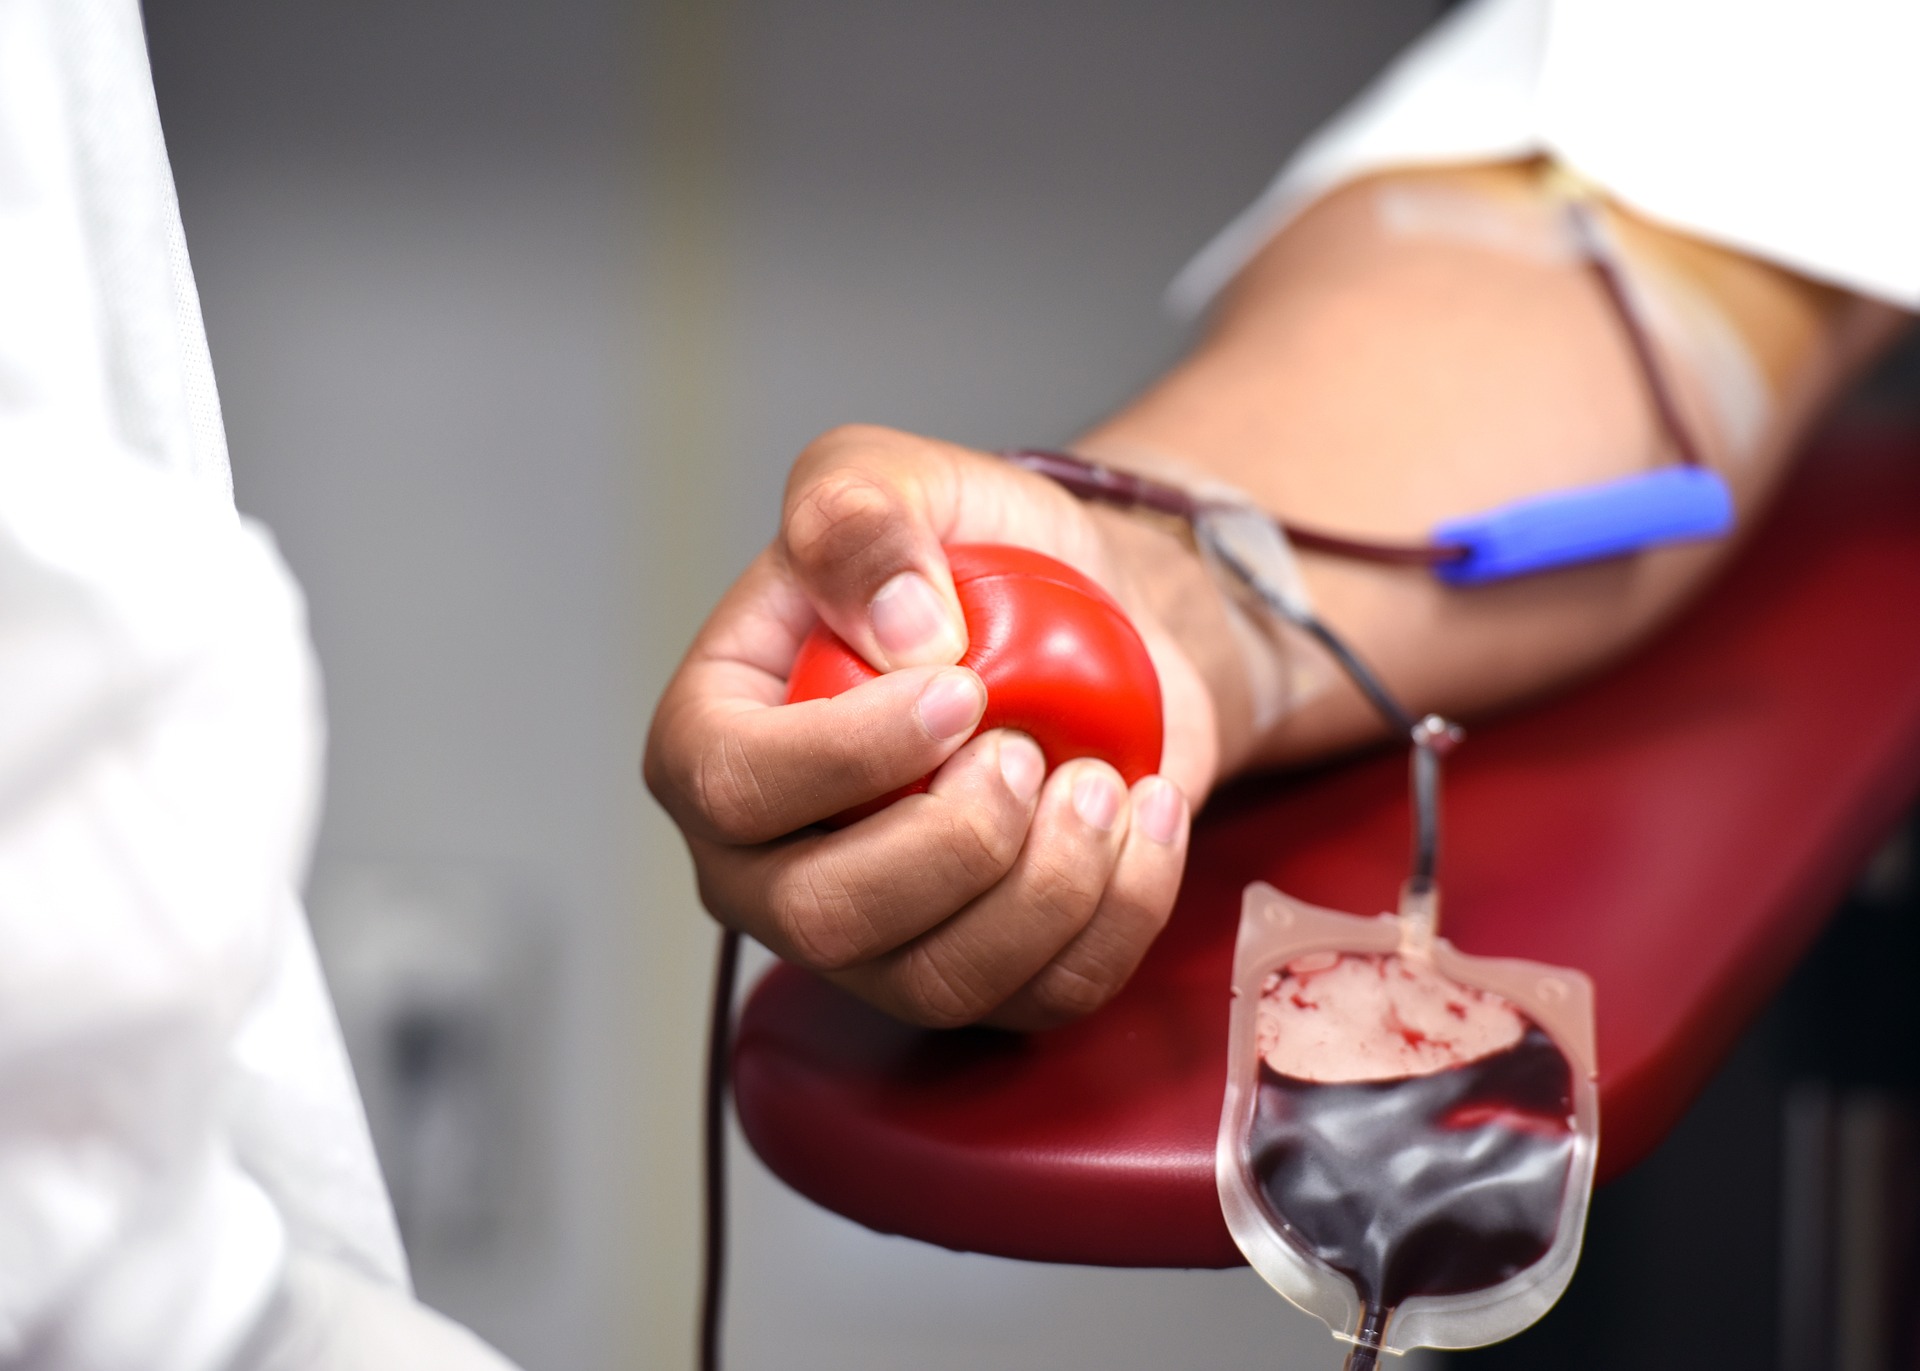 Person squeezing a red ball in their right hand as they receive a blood transfusion